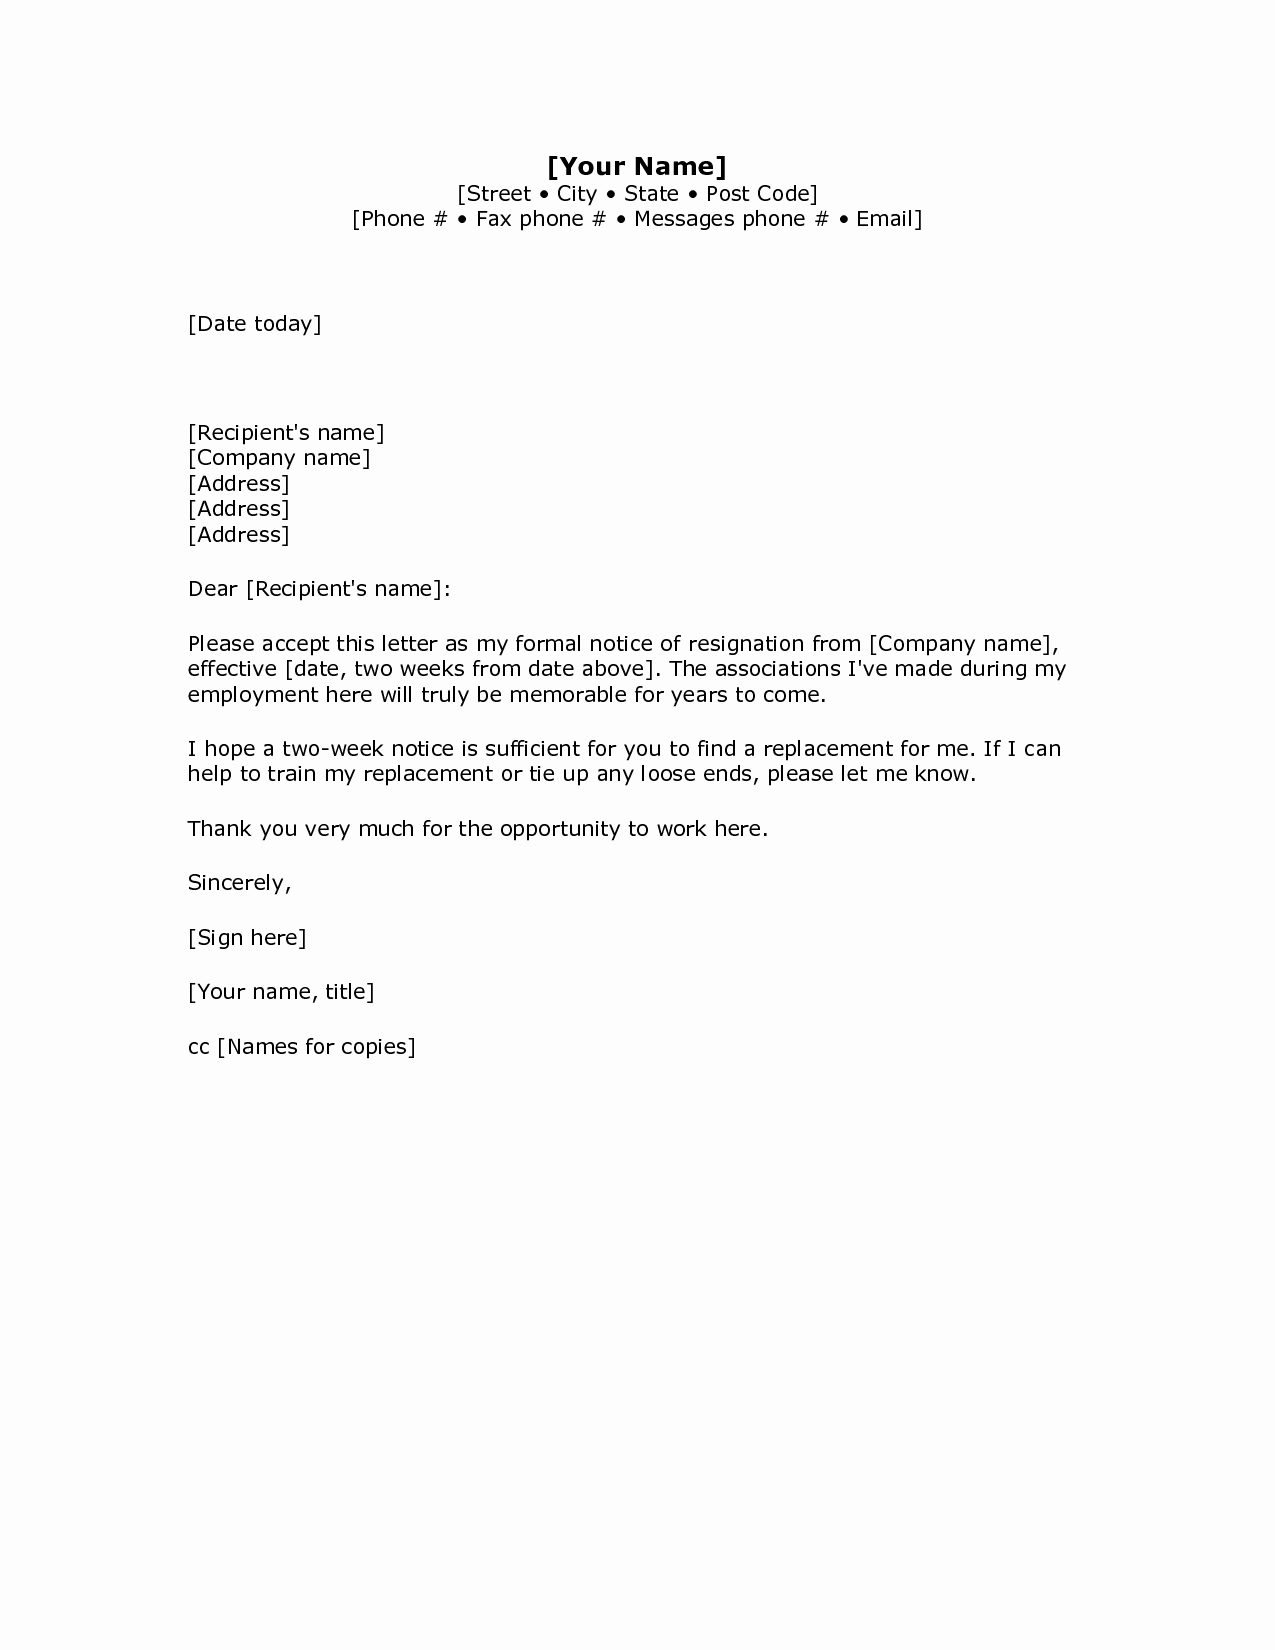 Samples Letter Of Resignation Awesome Two Weeks Notice Letter How to Write Guide &amp; Resignation